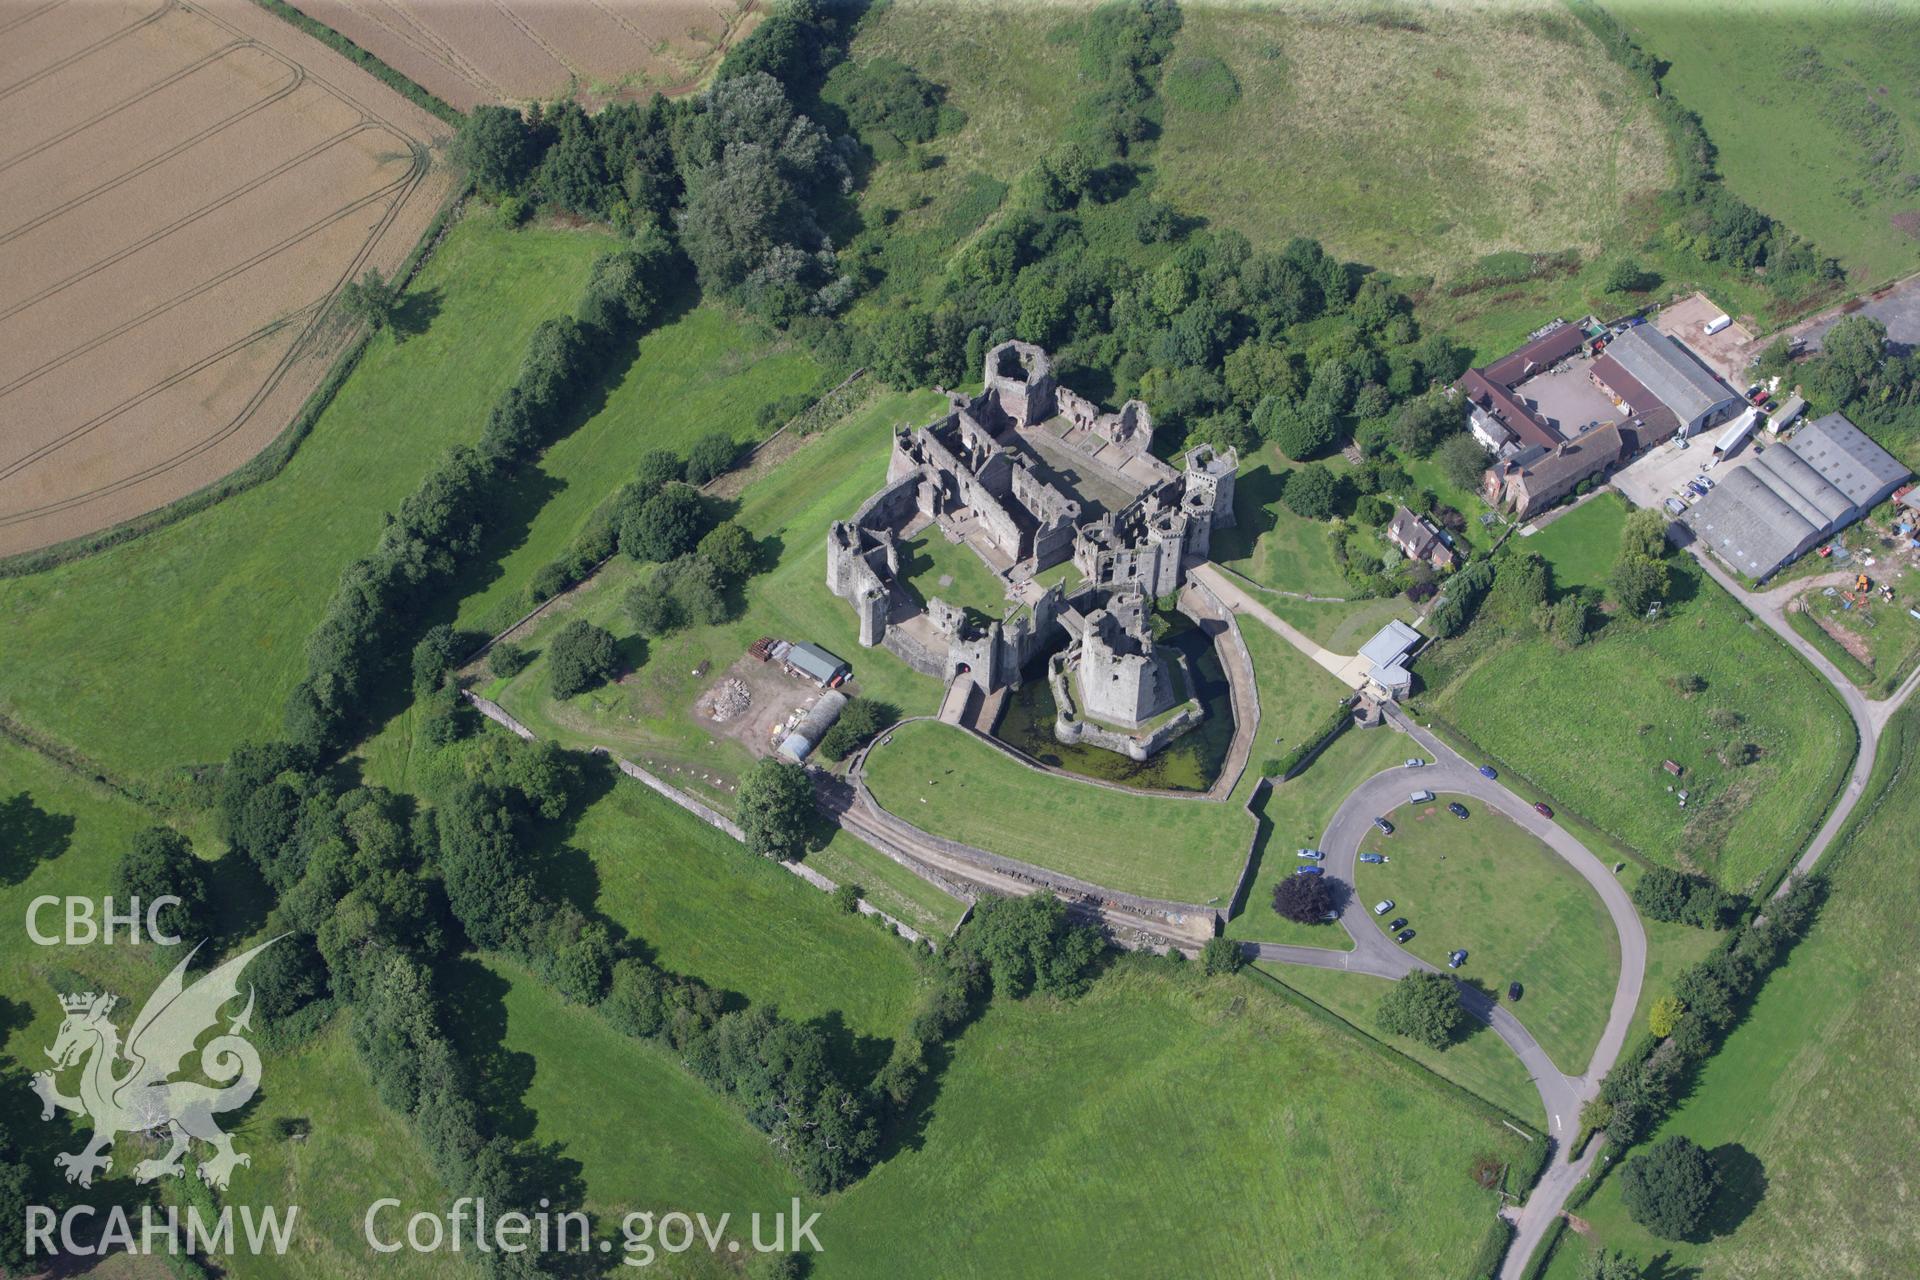 RCAHMW colour oblique aerial photograph of Raglan Castle. Taken on 23 July 2009 by Toby Driver